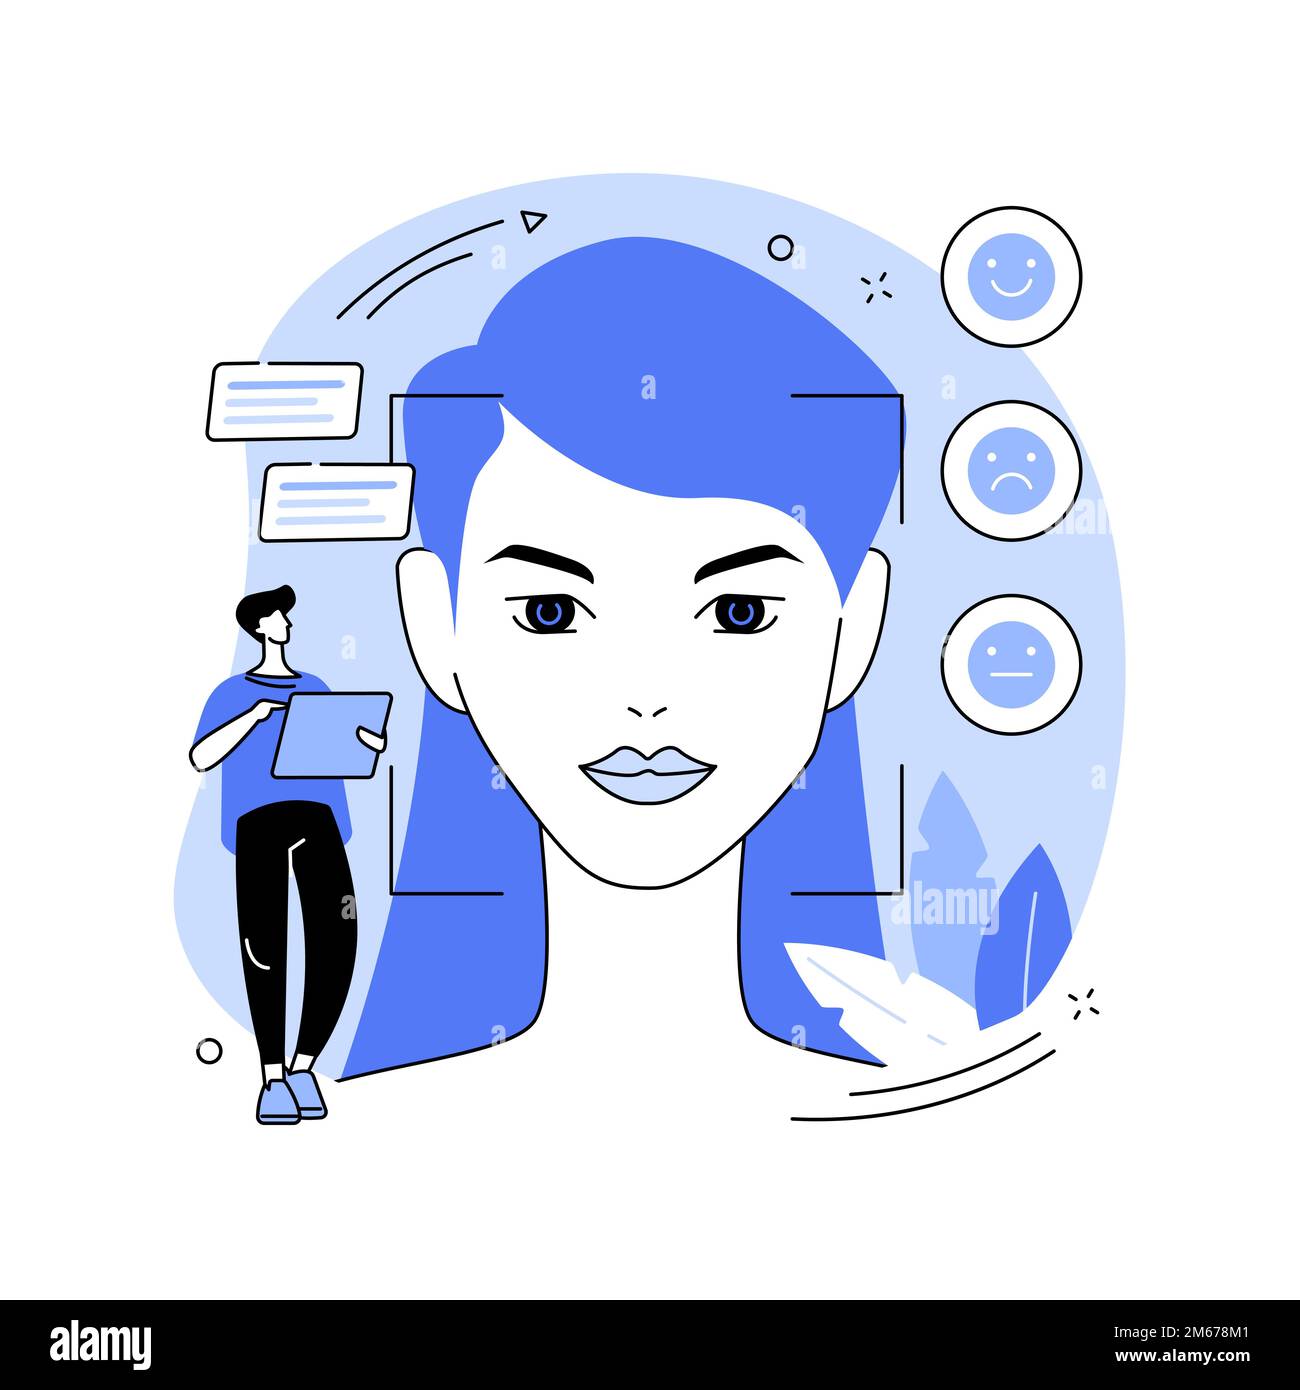 Emotion detection abstract concept vector illustration. Speech, emotional state recognition, emotion detection from text, sensor technology, machine l Stock Vector